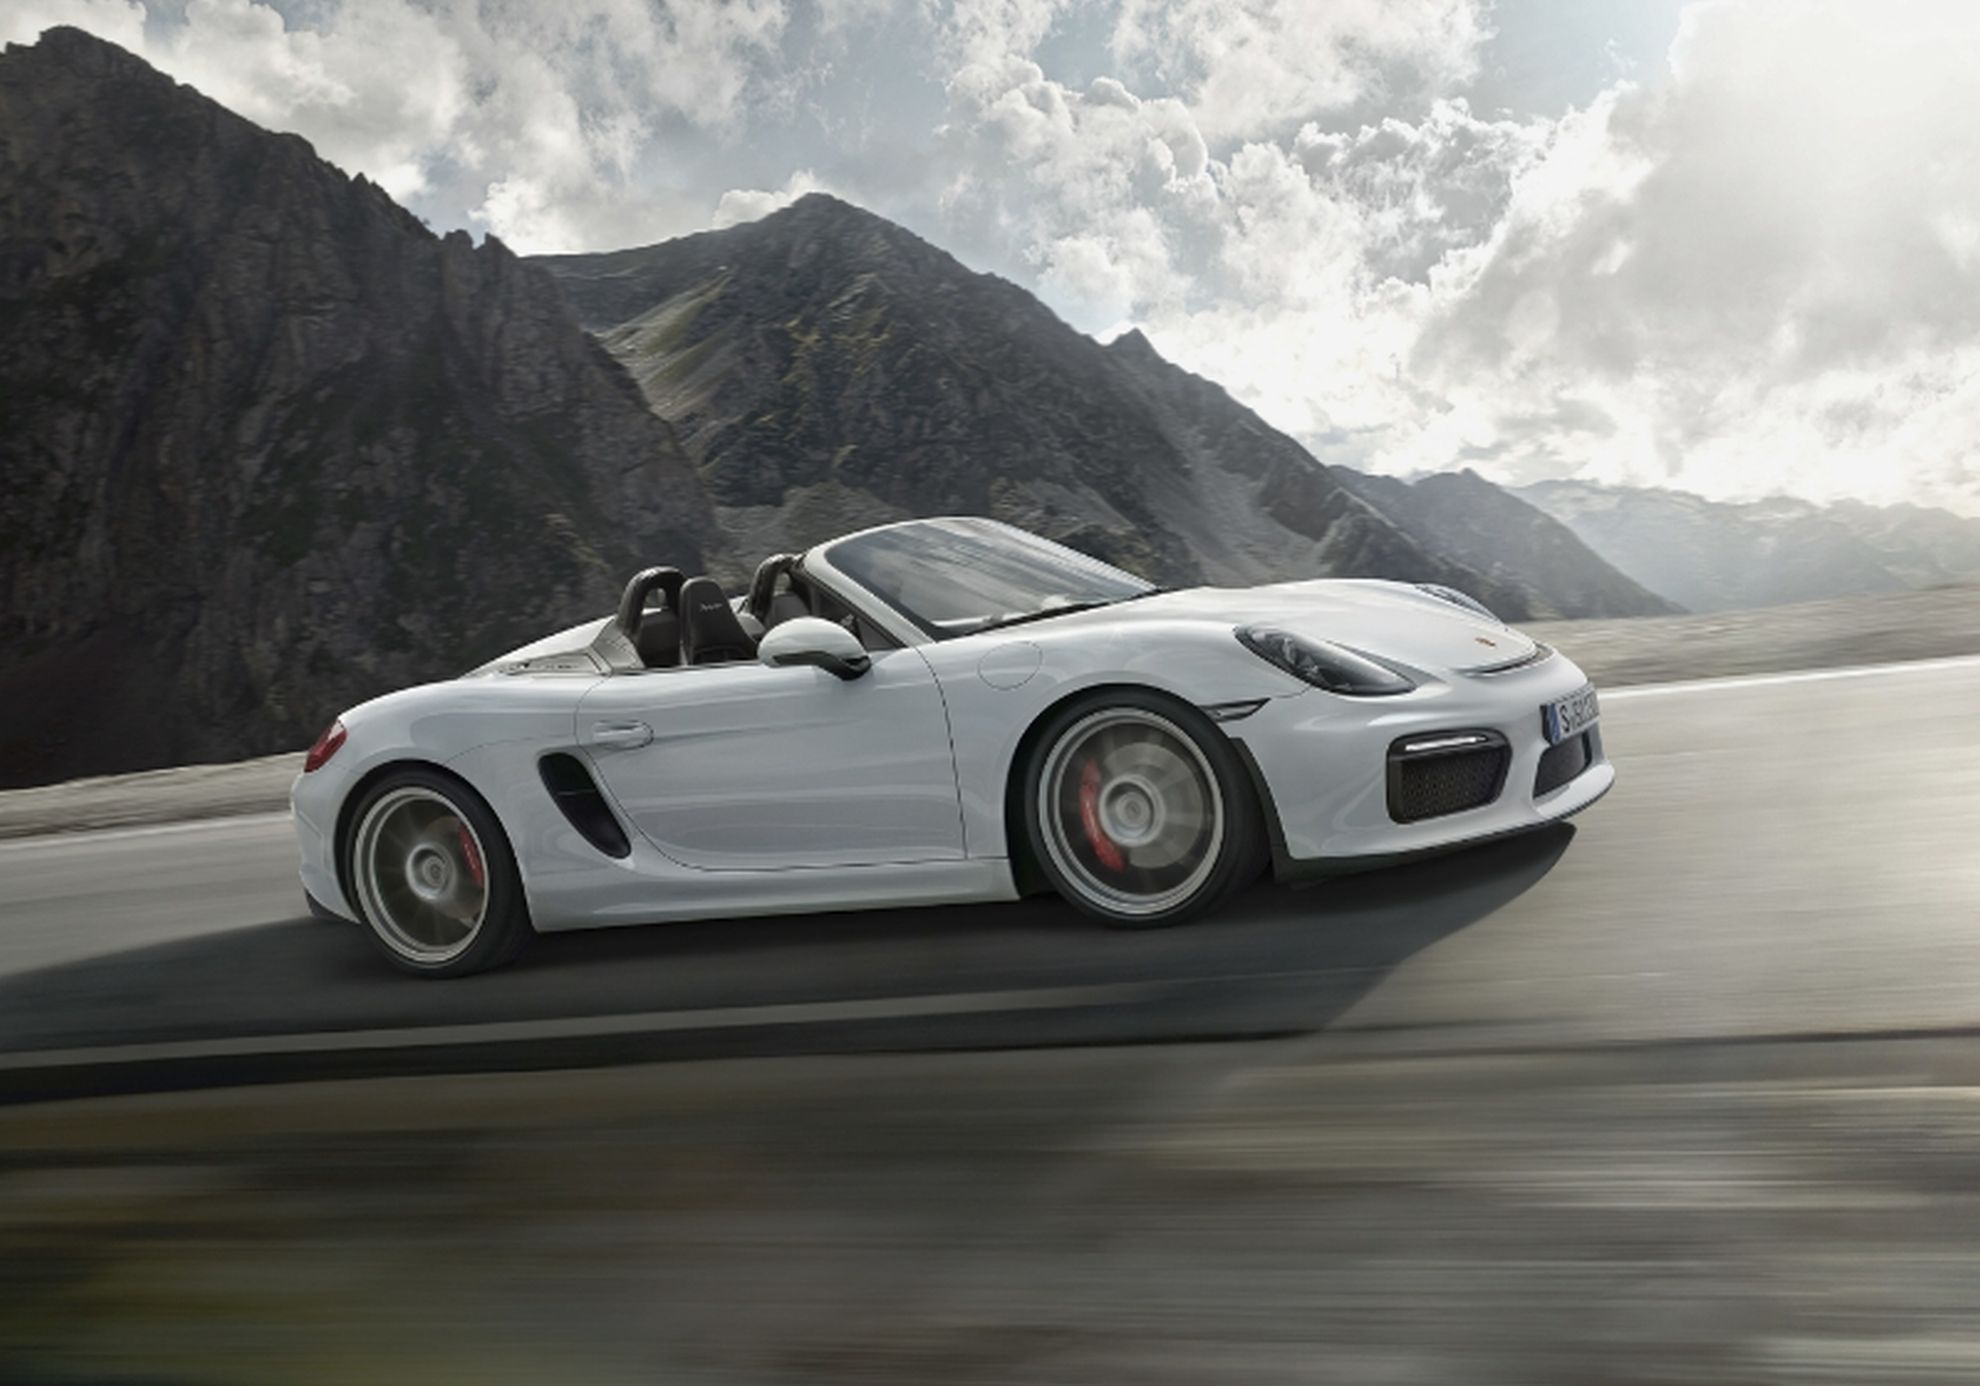 World premiere of Boxster Spyder at New York International Auto Show